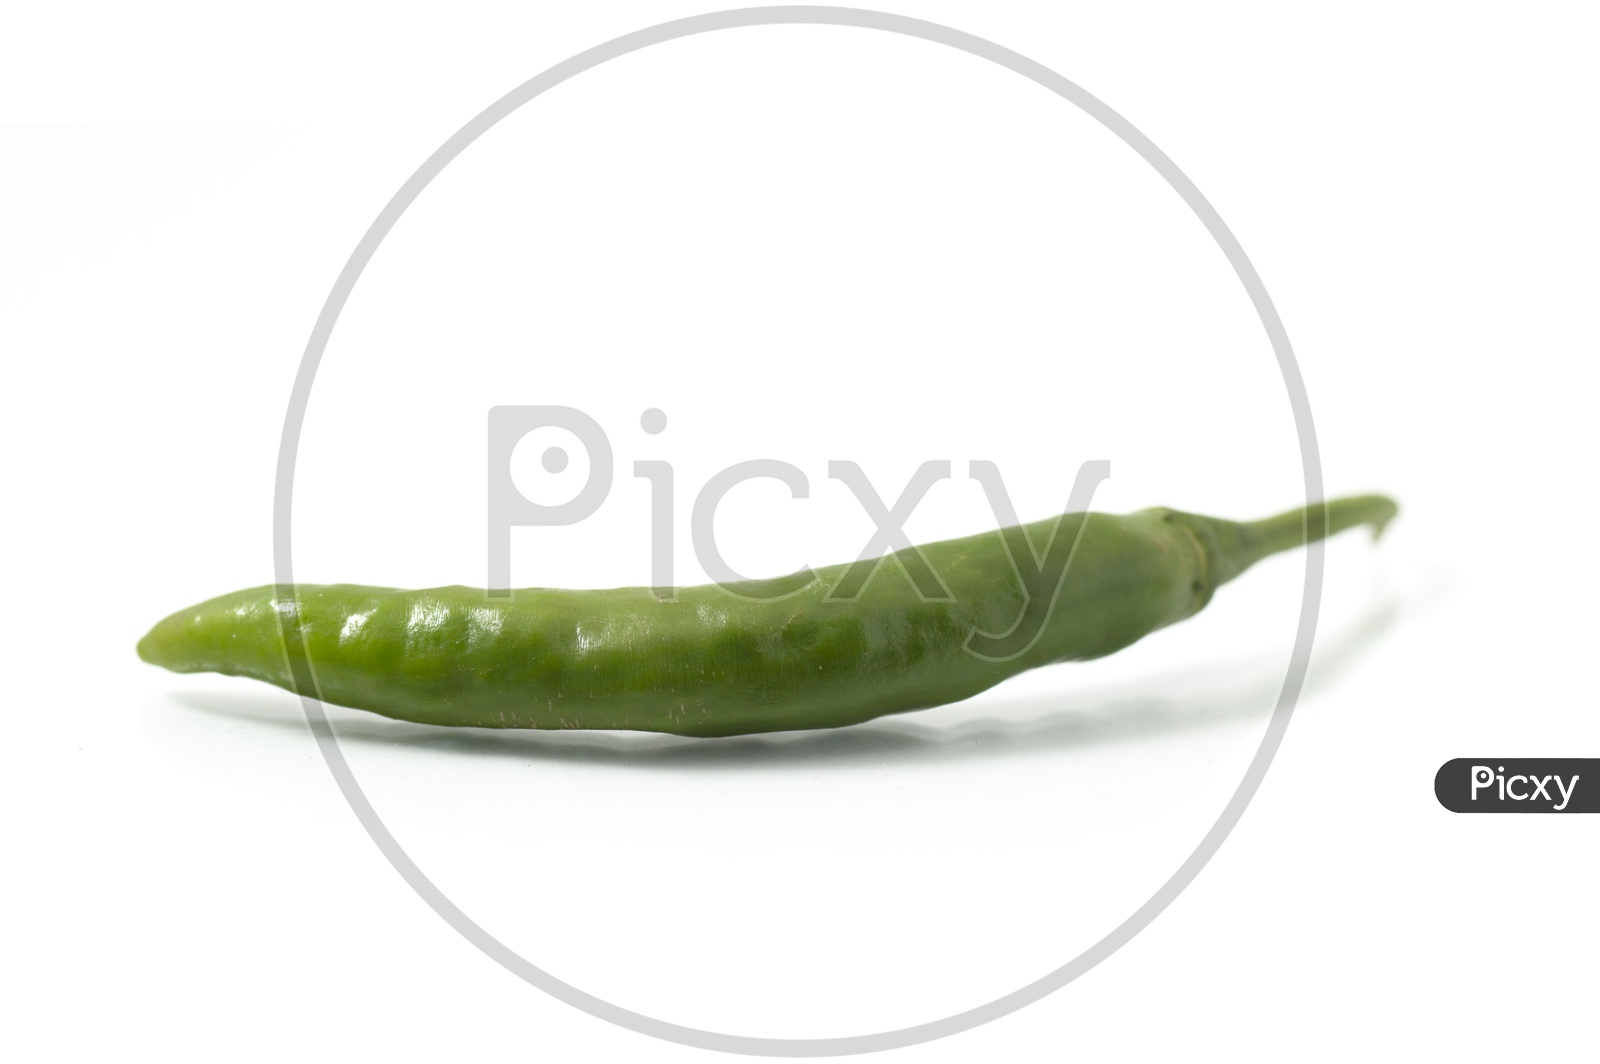 Green peppers isolated on white